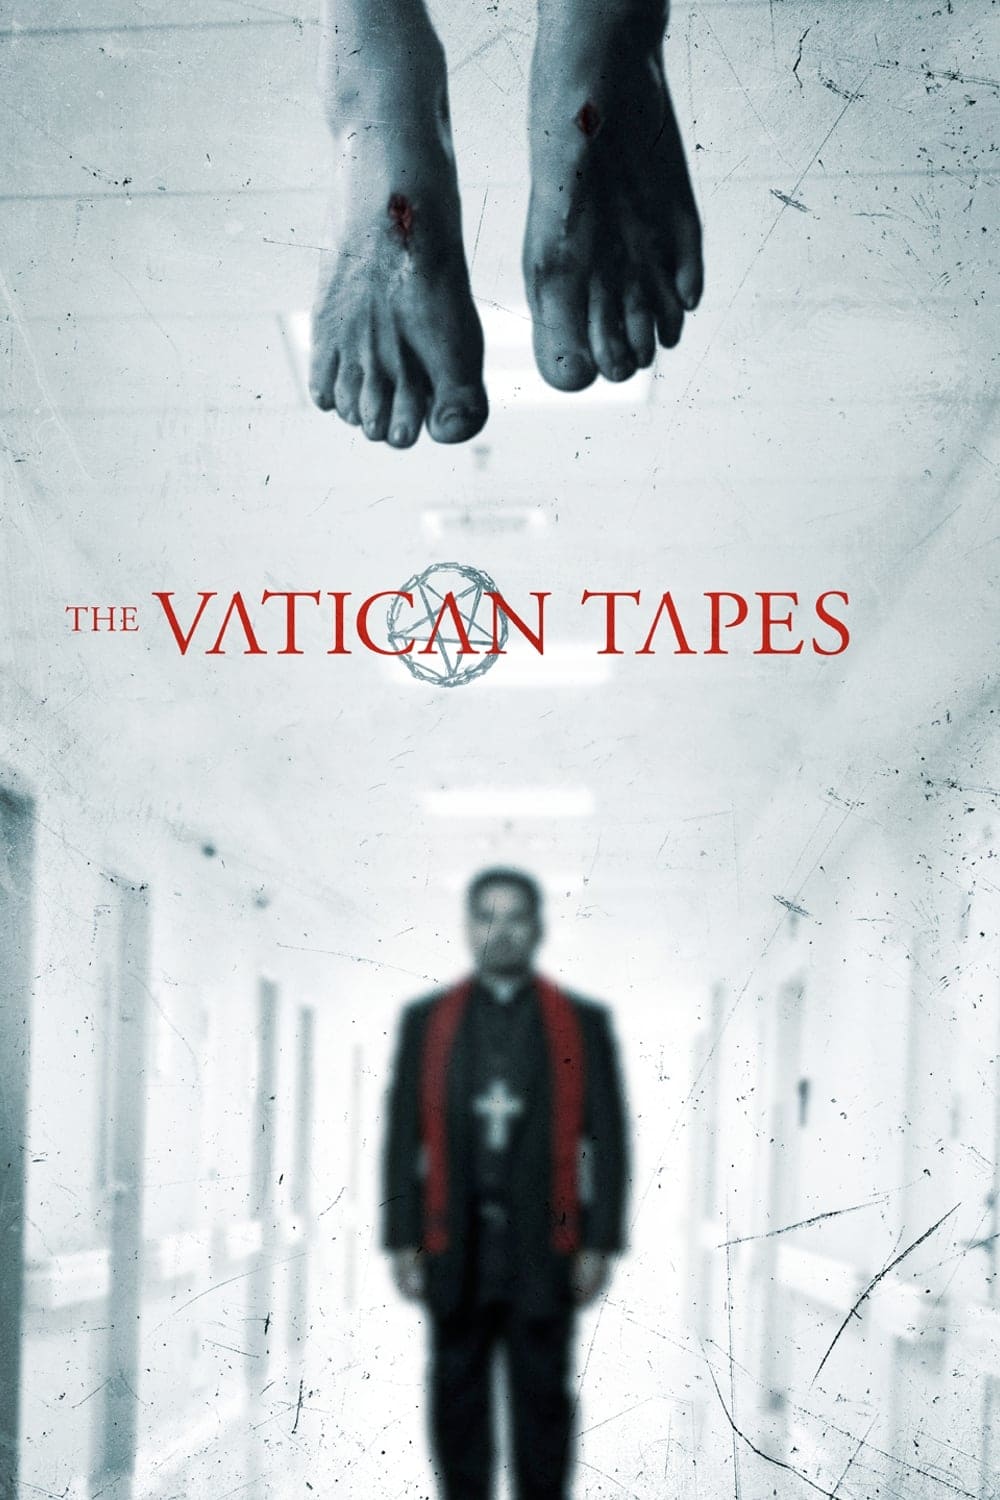 Poster for the movie "The Vatican Tapes"